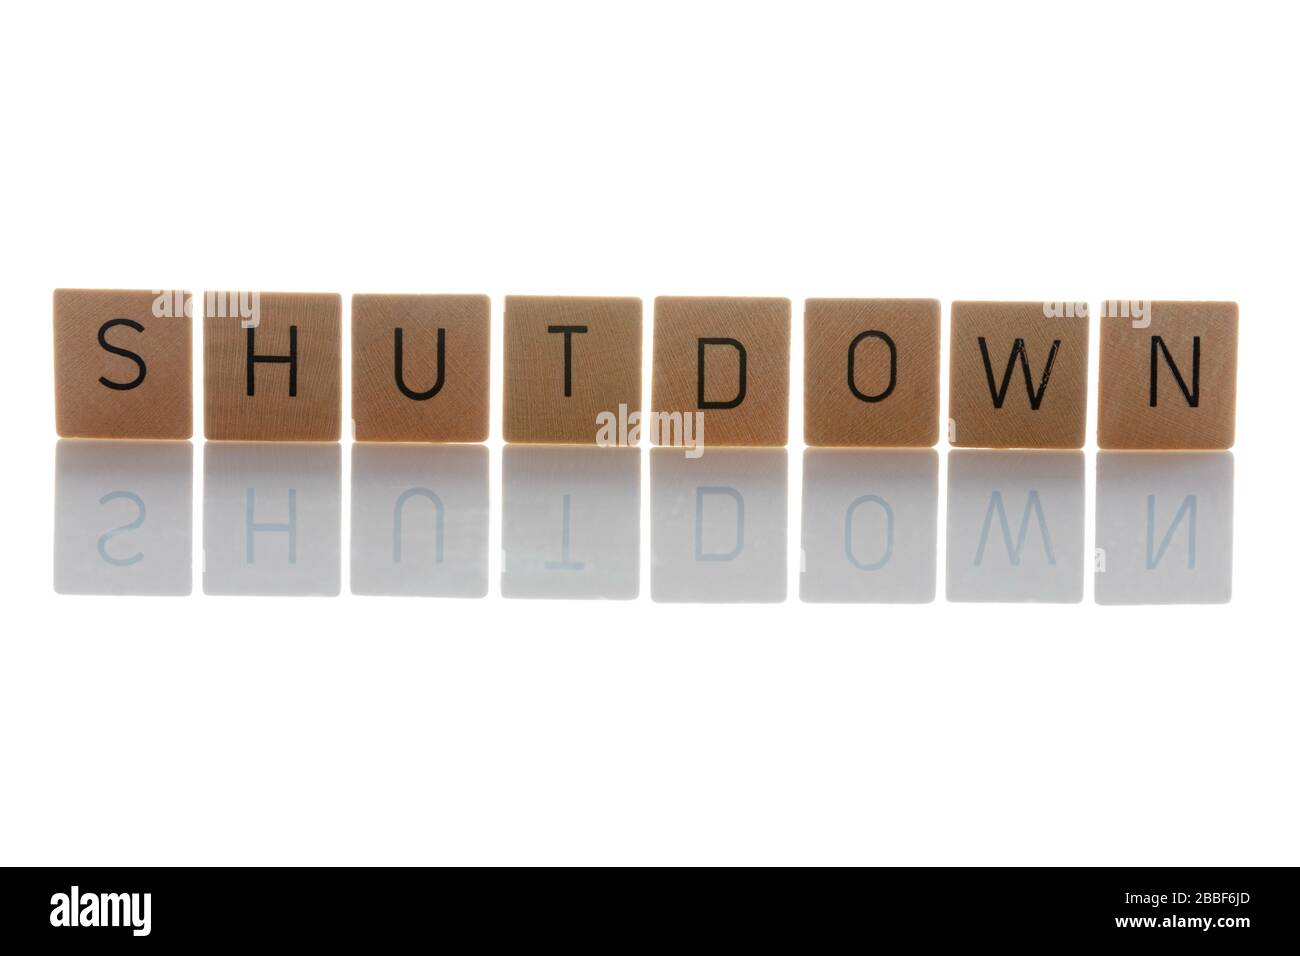 Shutdown of the economy and social contacts because of the coronavirus crisis. Isolated on white background. Germany Stock Photo